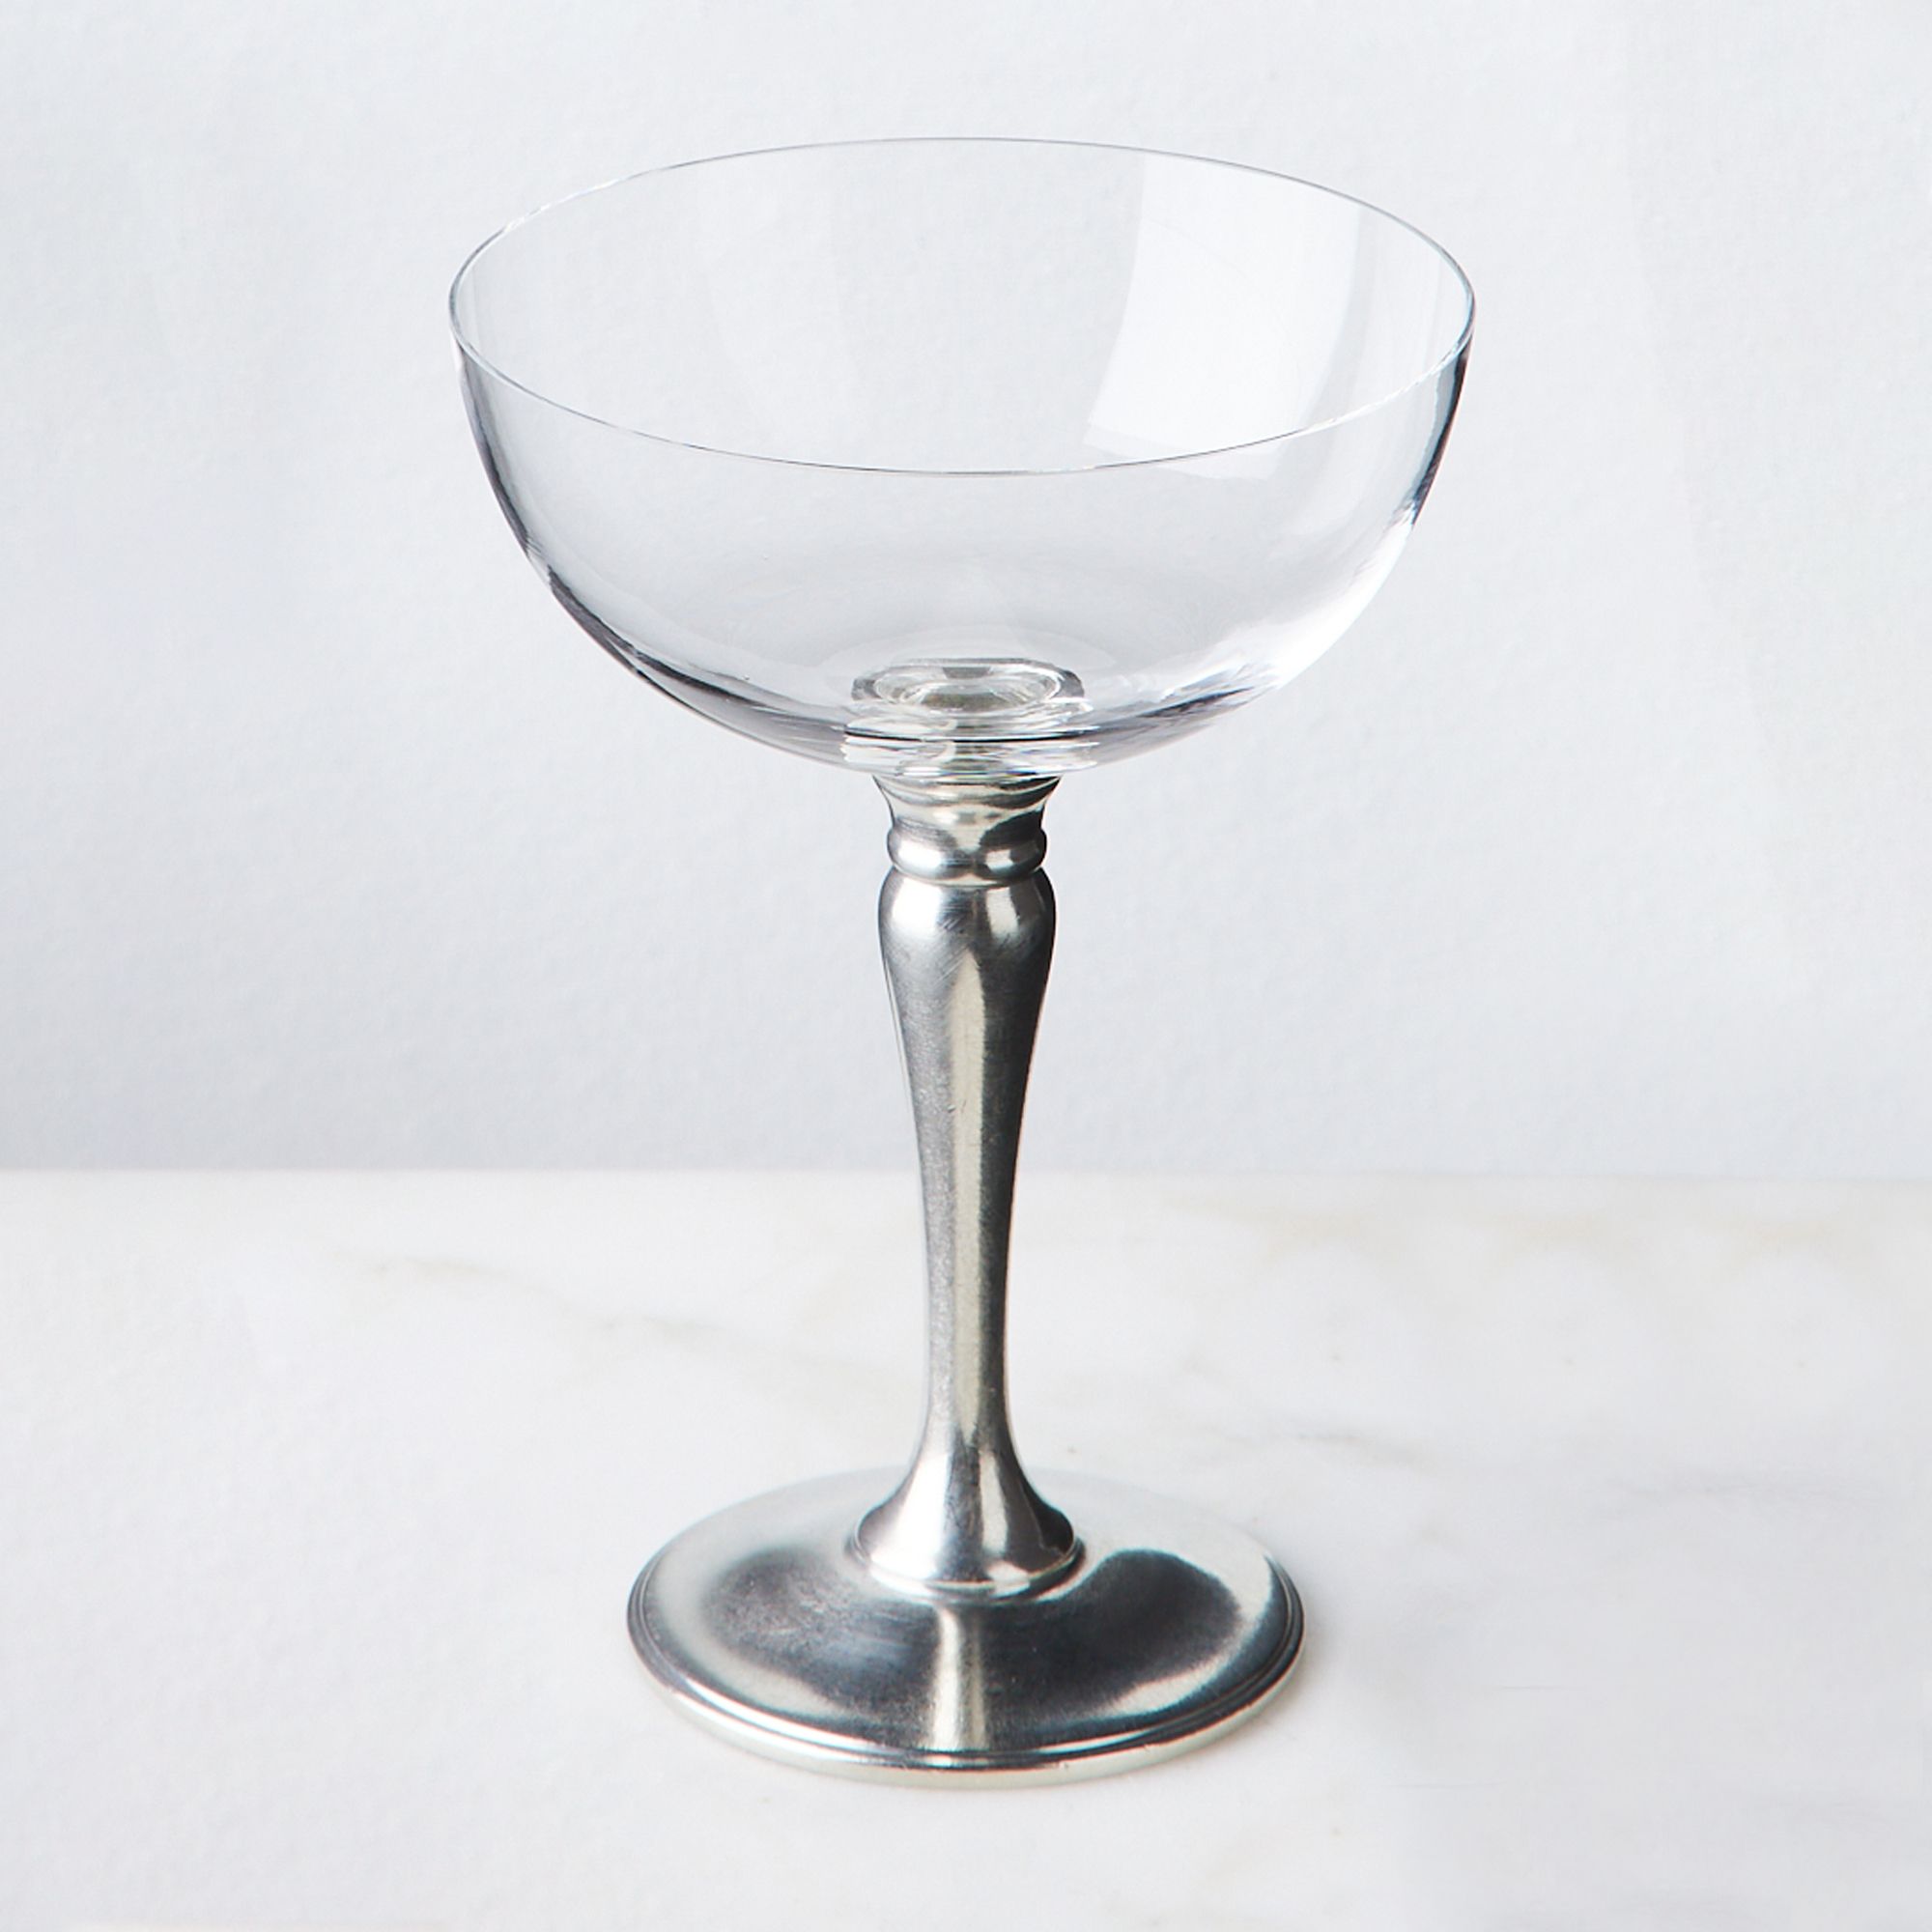 MATCH Champagne & Cocktail Coupe, Pewter & Crystal, Handmade in Italy